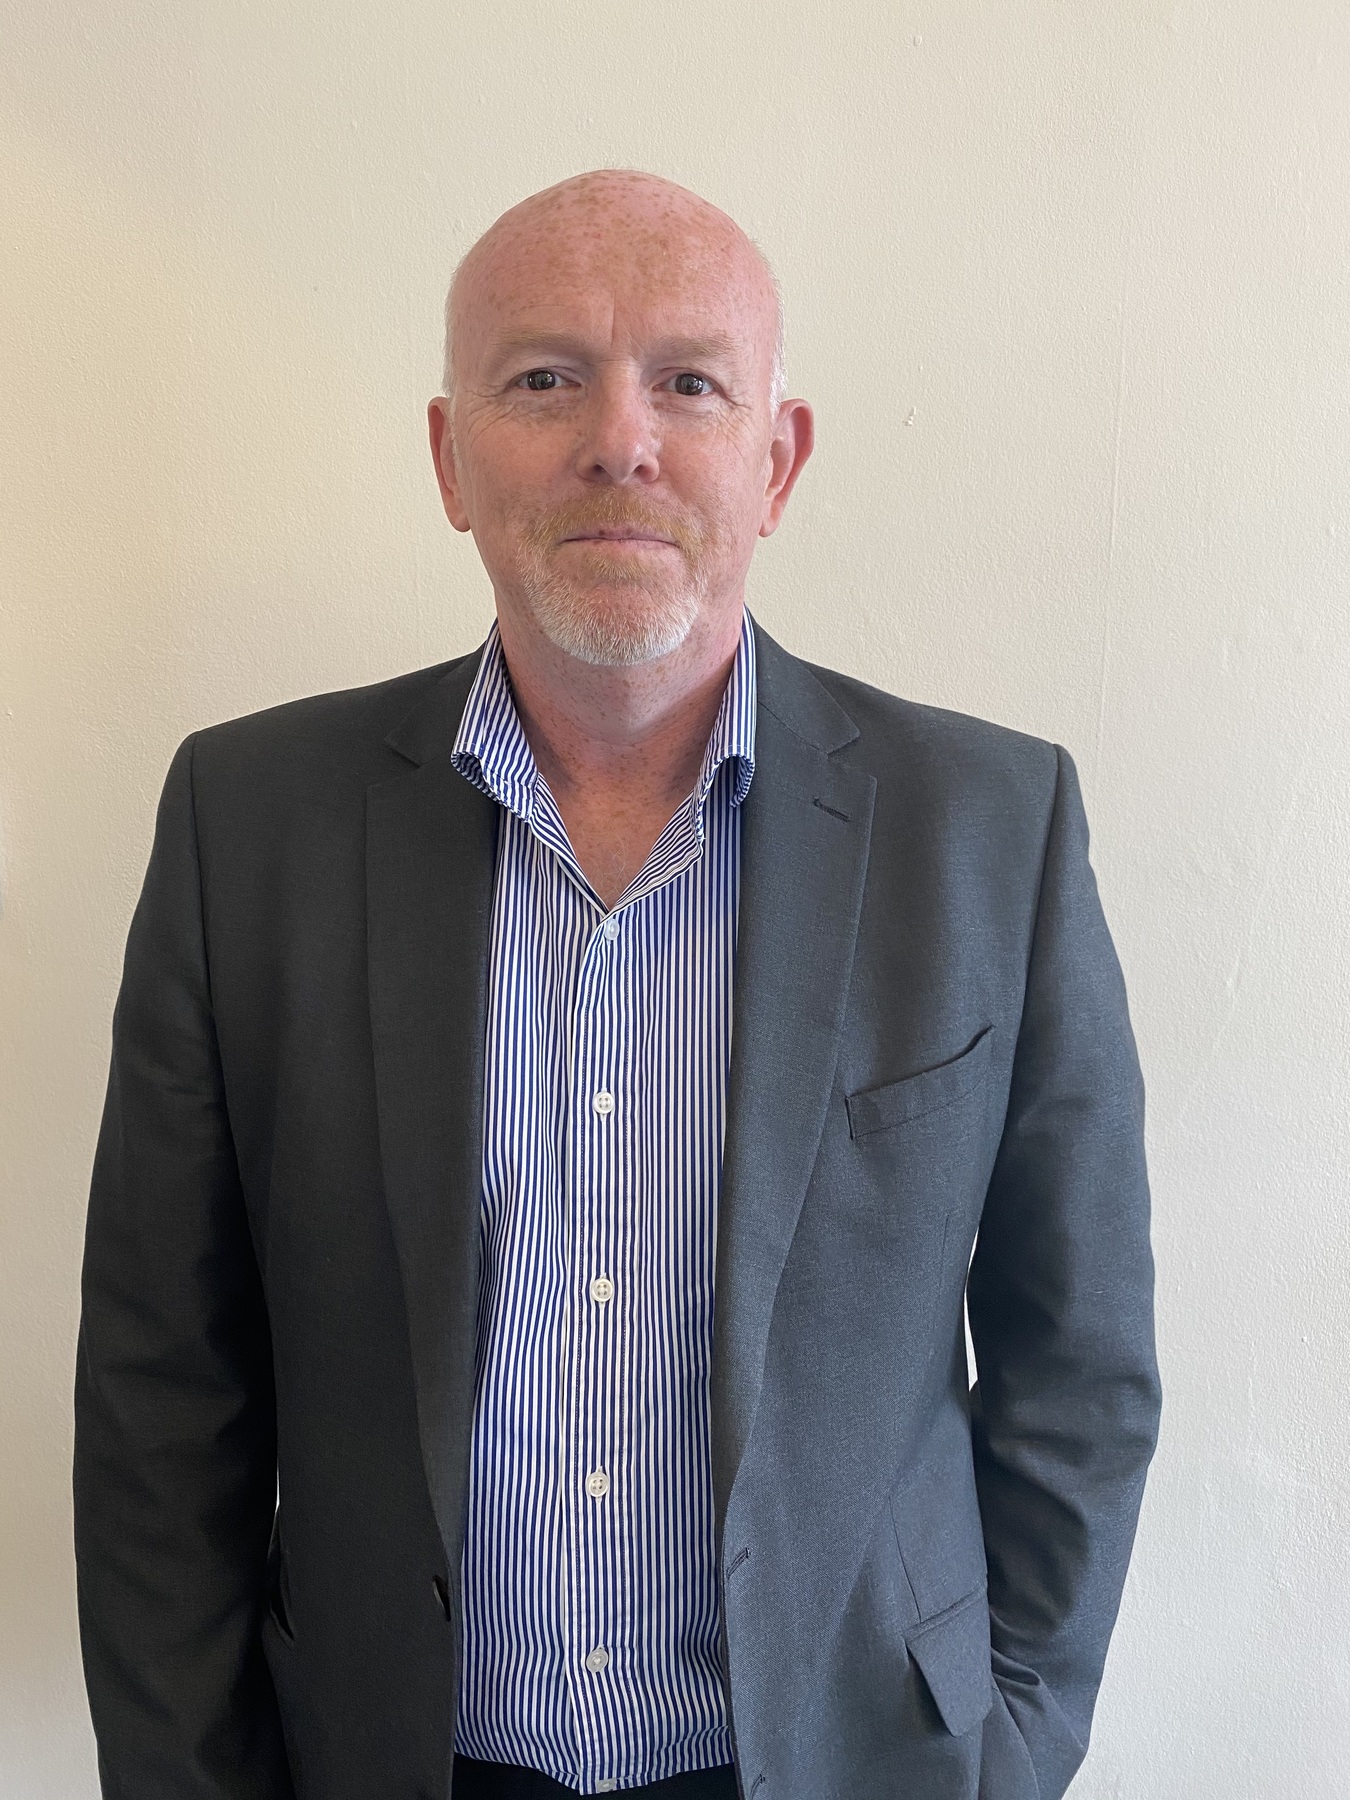 TGt Meets…The New Sales and Development Manager at Responsive Personnel